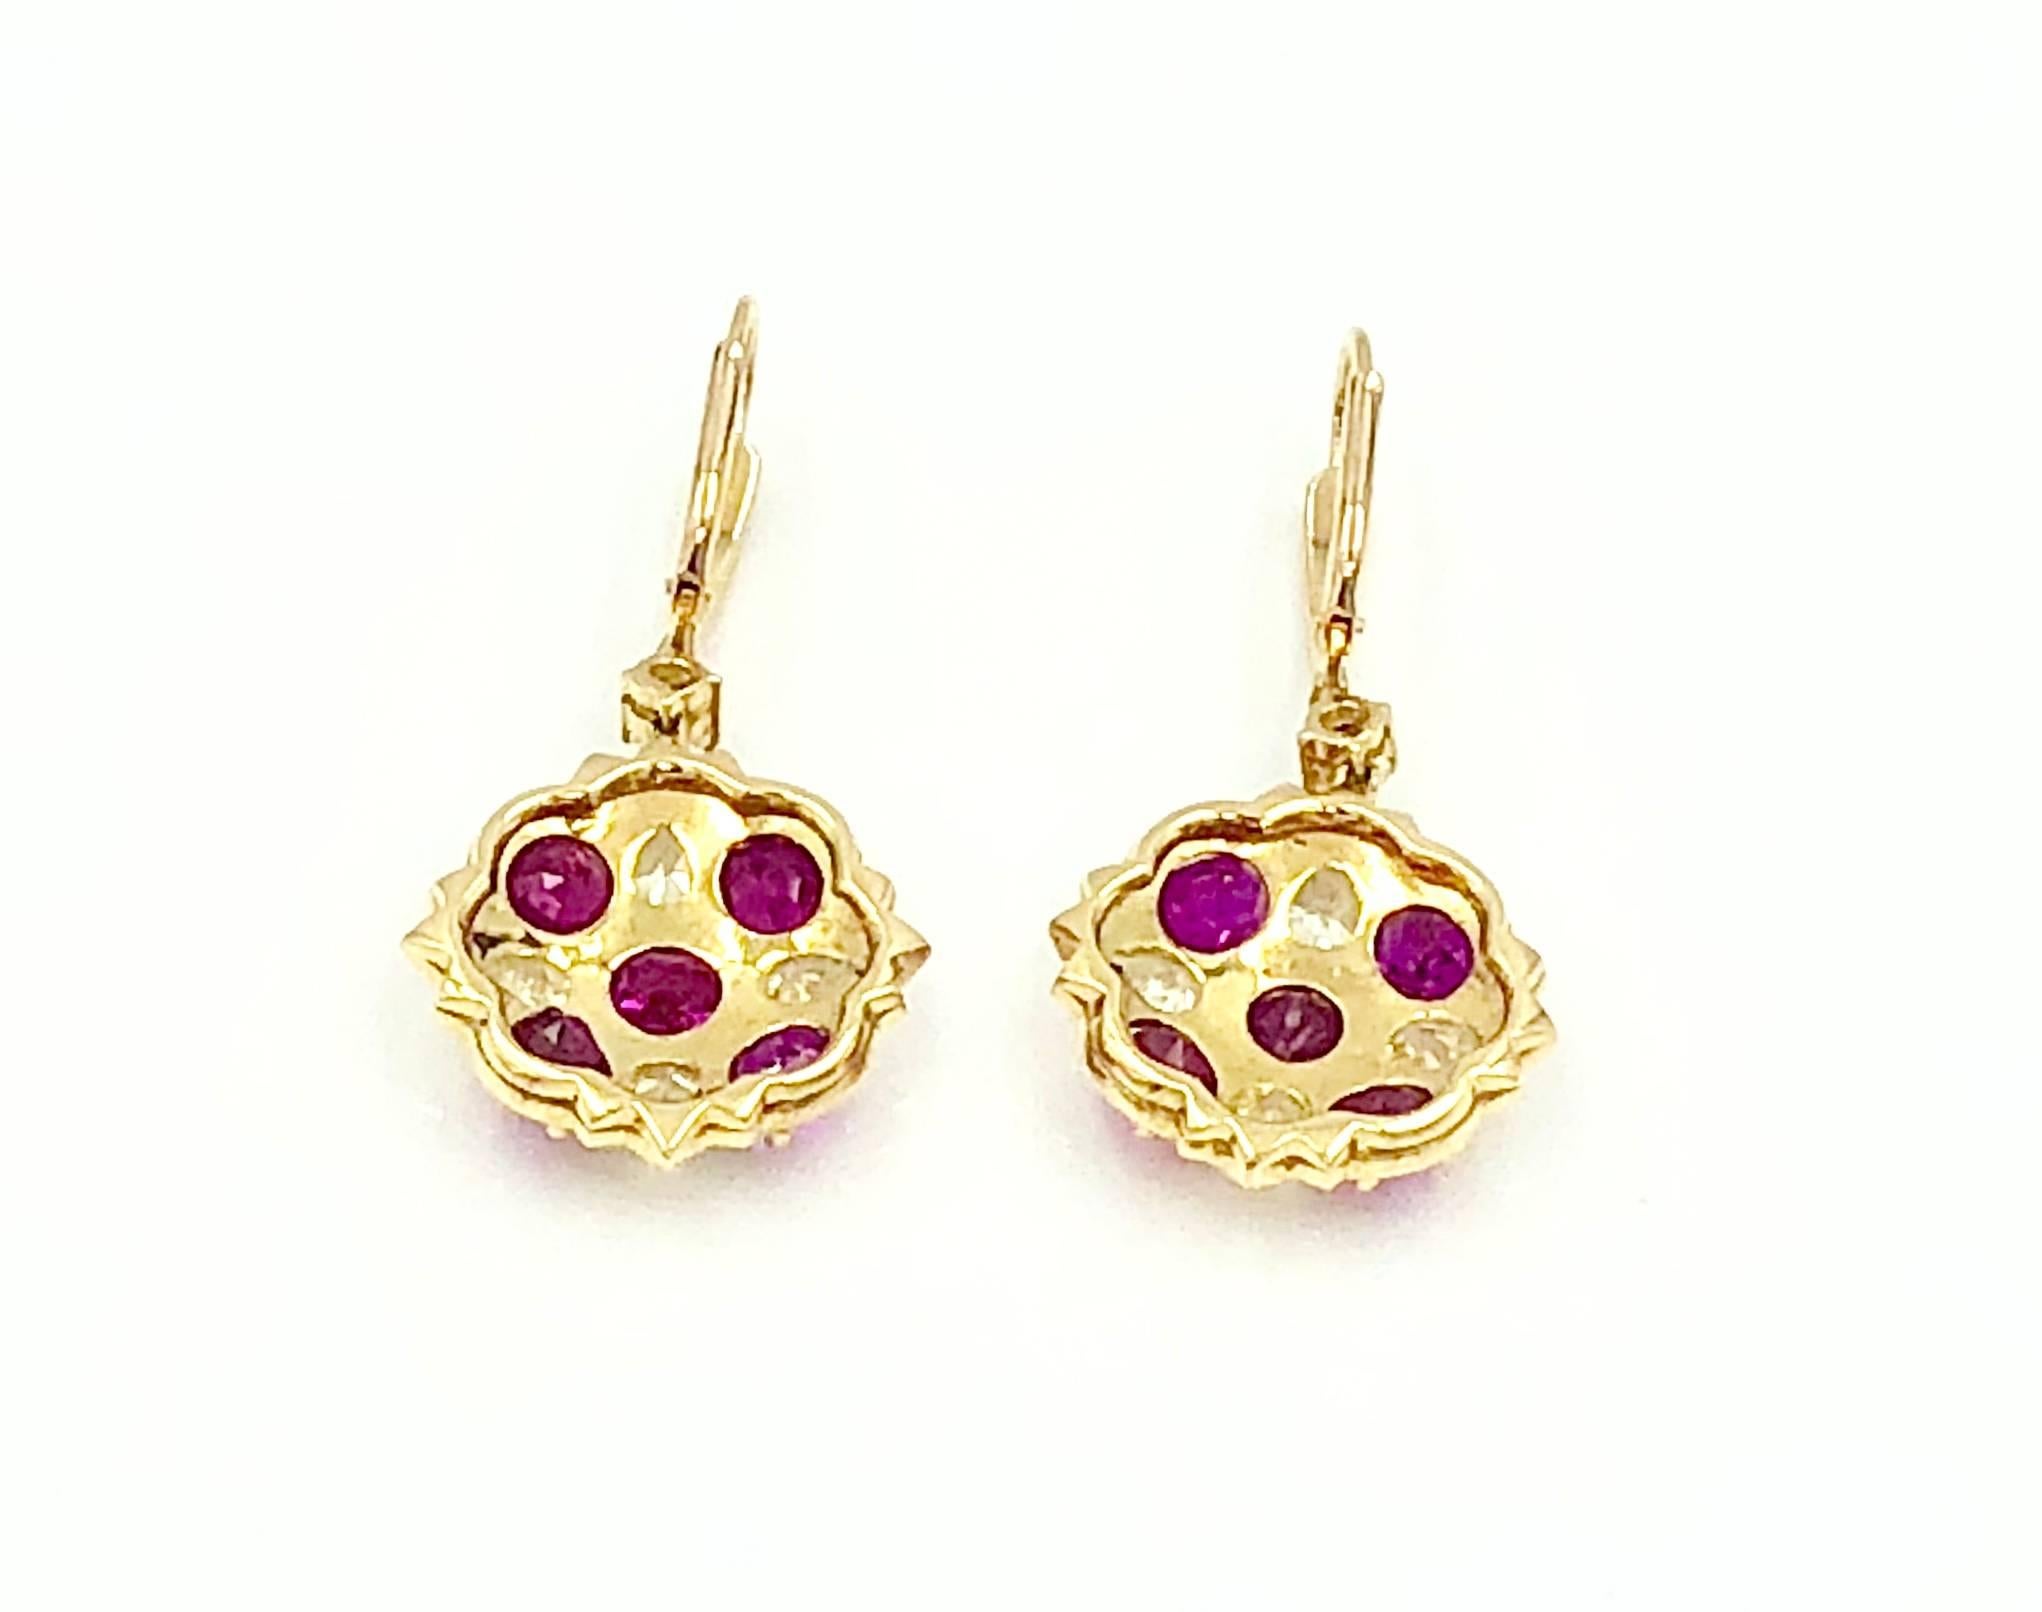 A modern roundish pair of earrings combining antique Burmese rubies and yellow diamonds. A brave match resulting in an exquisite and colorful piece of jewelry.

10 Burma Rubies (7,80ct), Diamond  (5,45 ct)